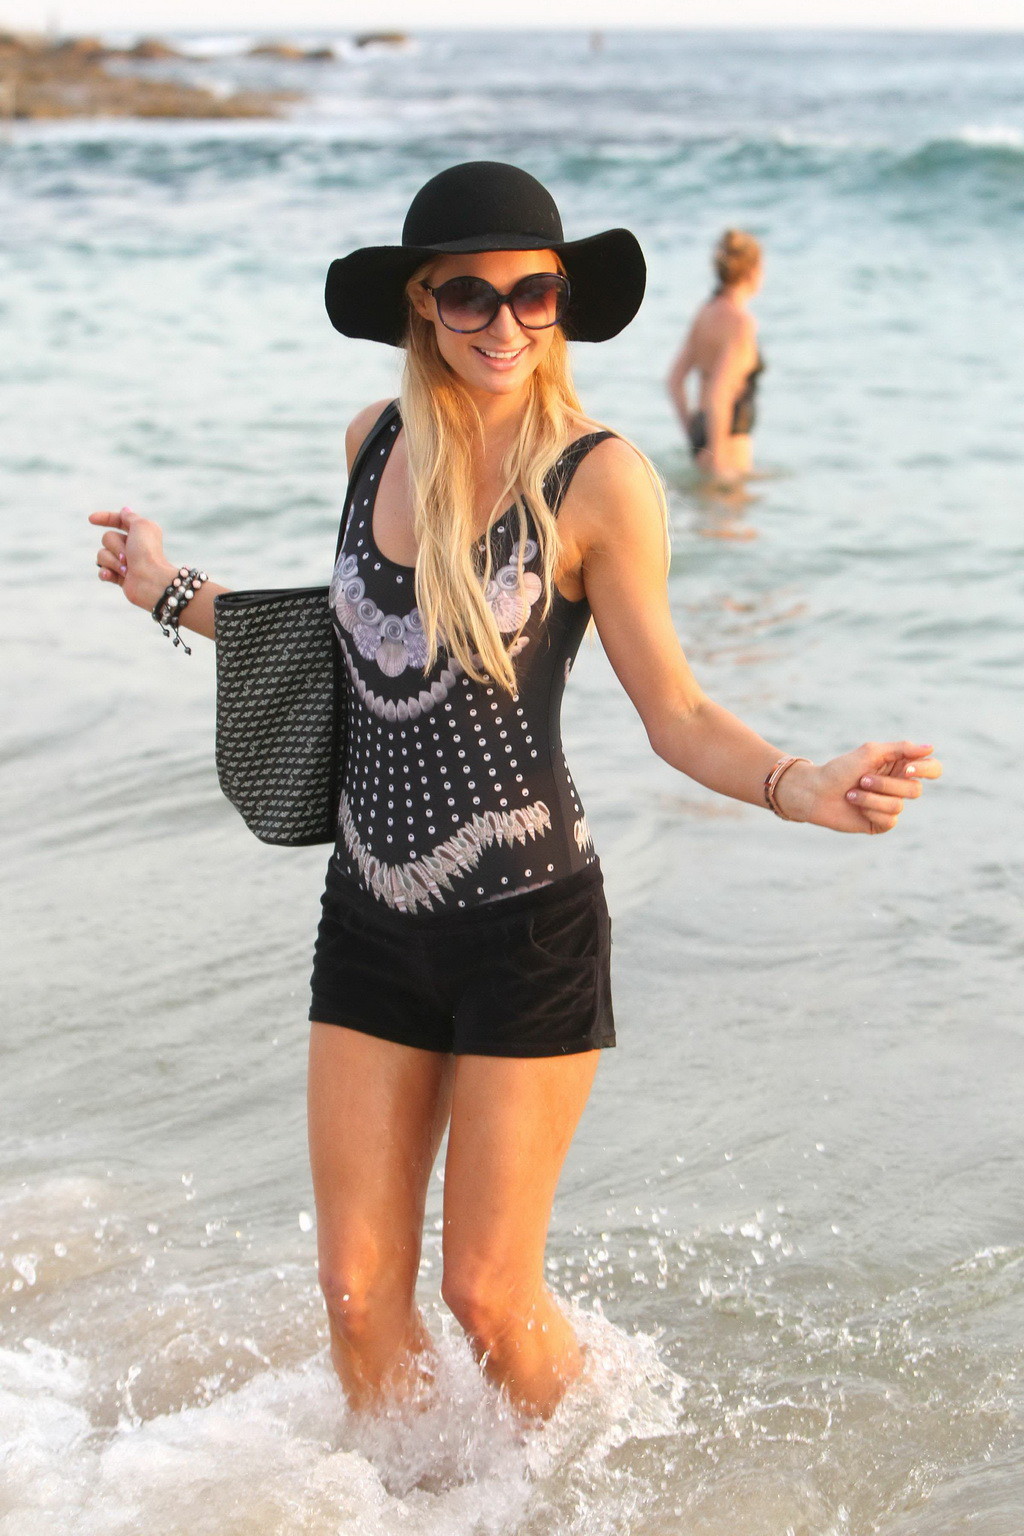 Paris Hilton showing her beautiful body in shorts and top at Bondi Beach in Sydn #75267794